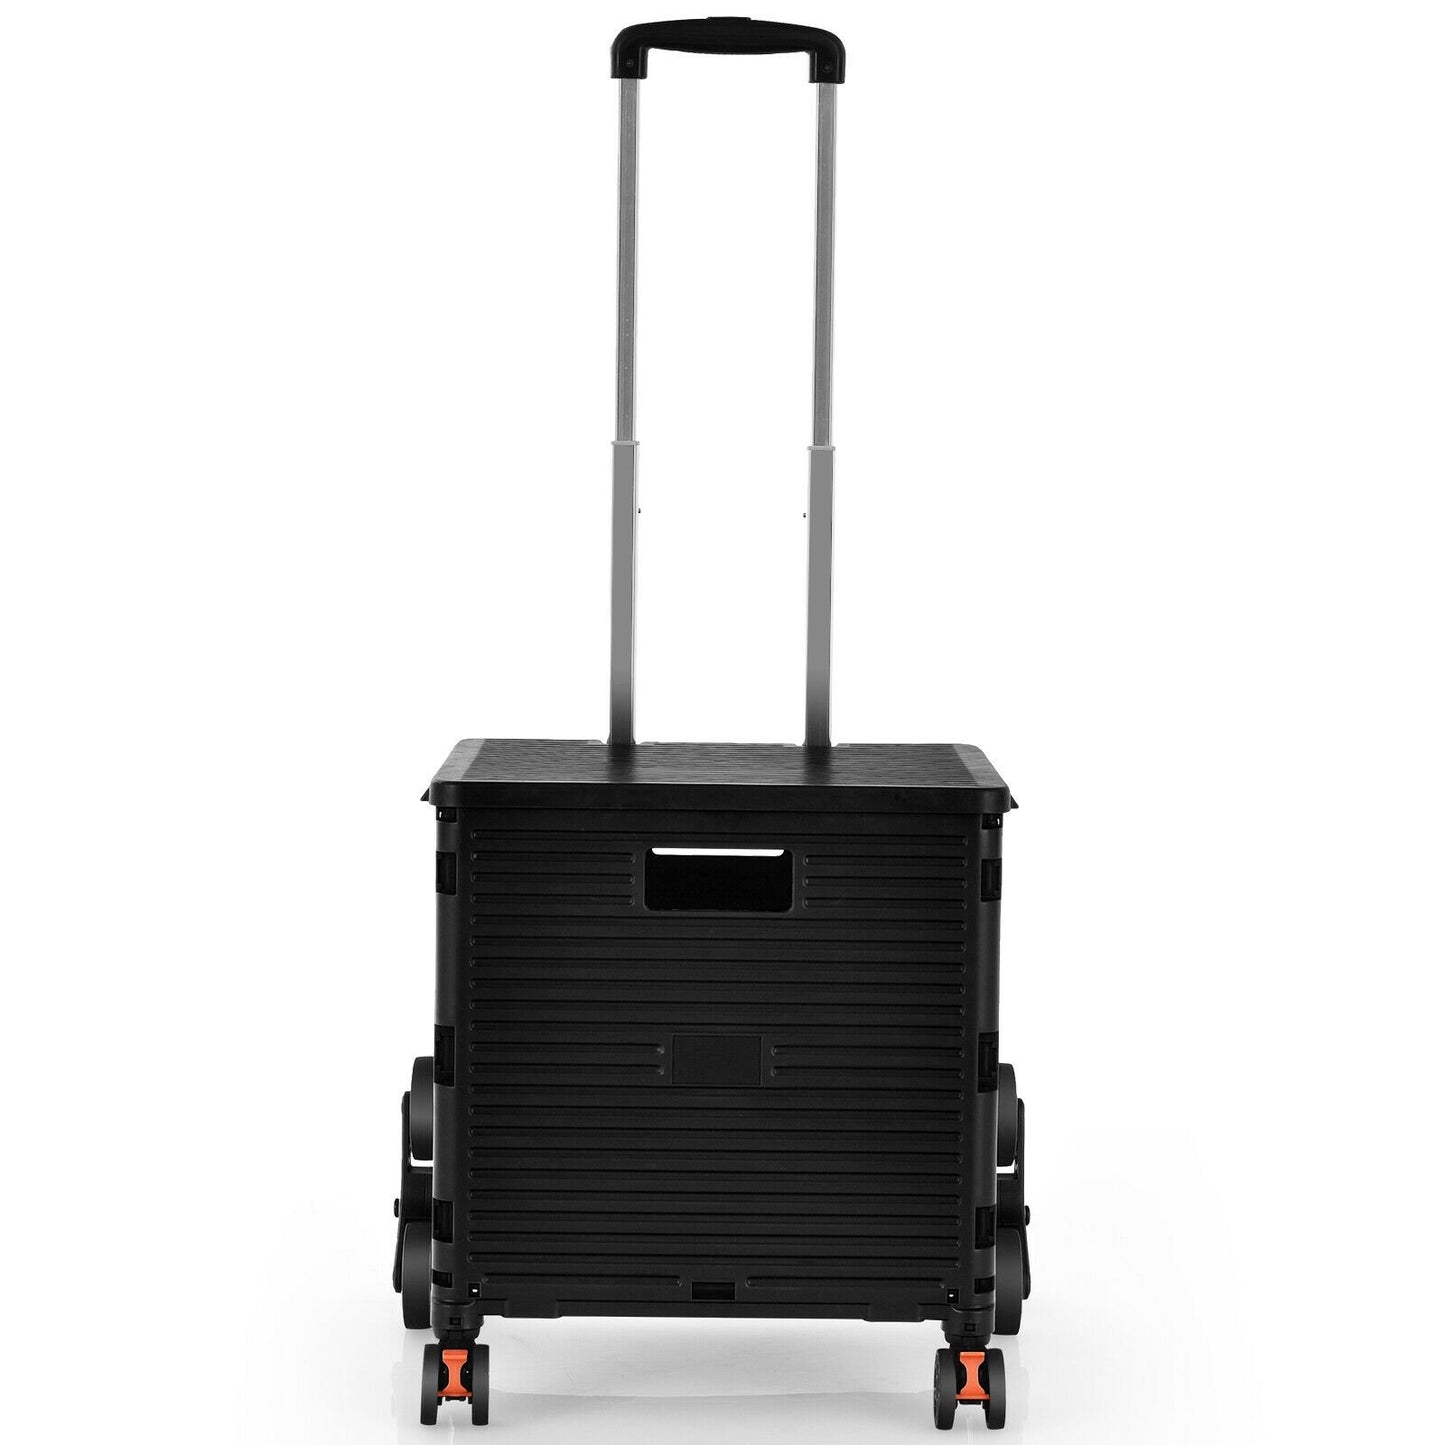 Foldable Utility Cart for Travel and Shopping, Black